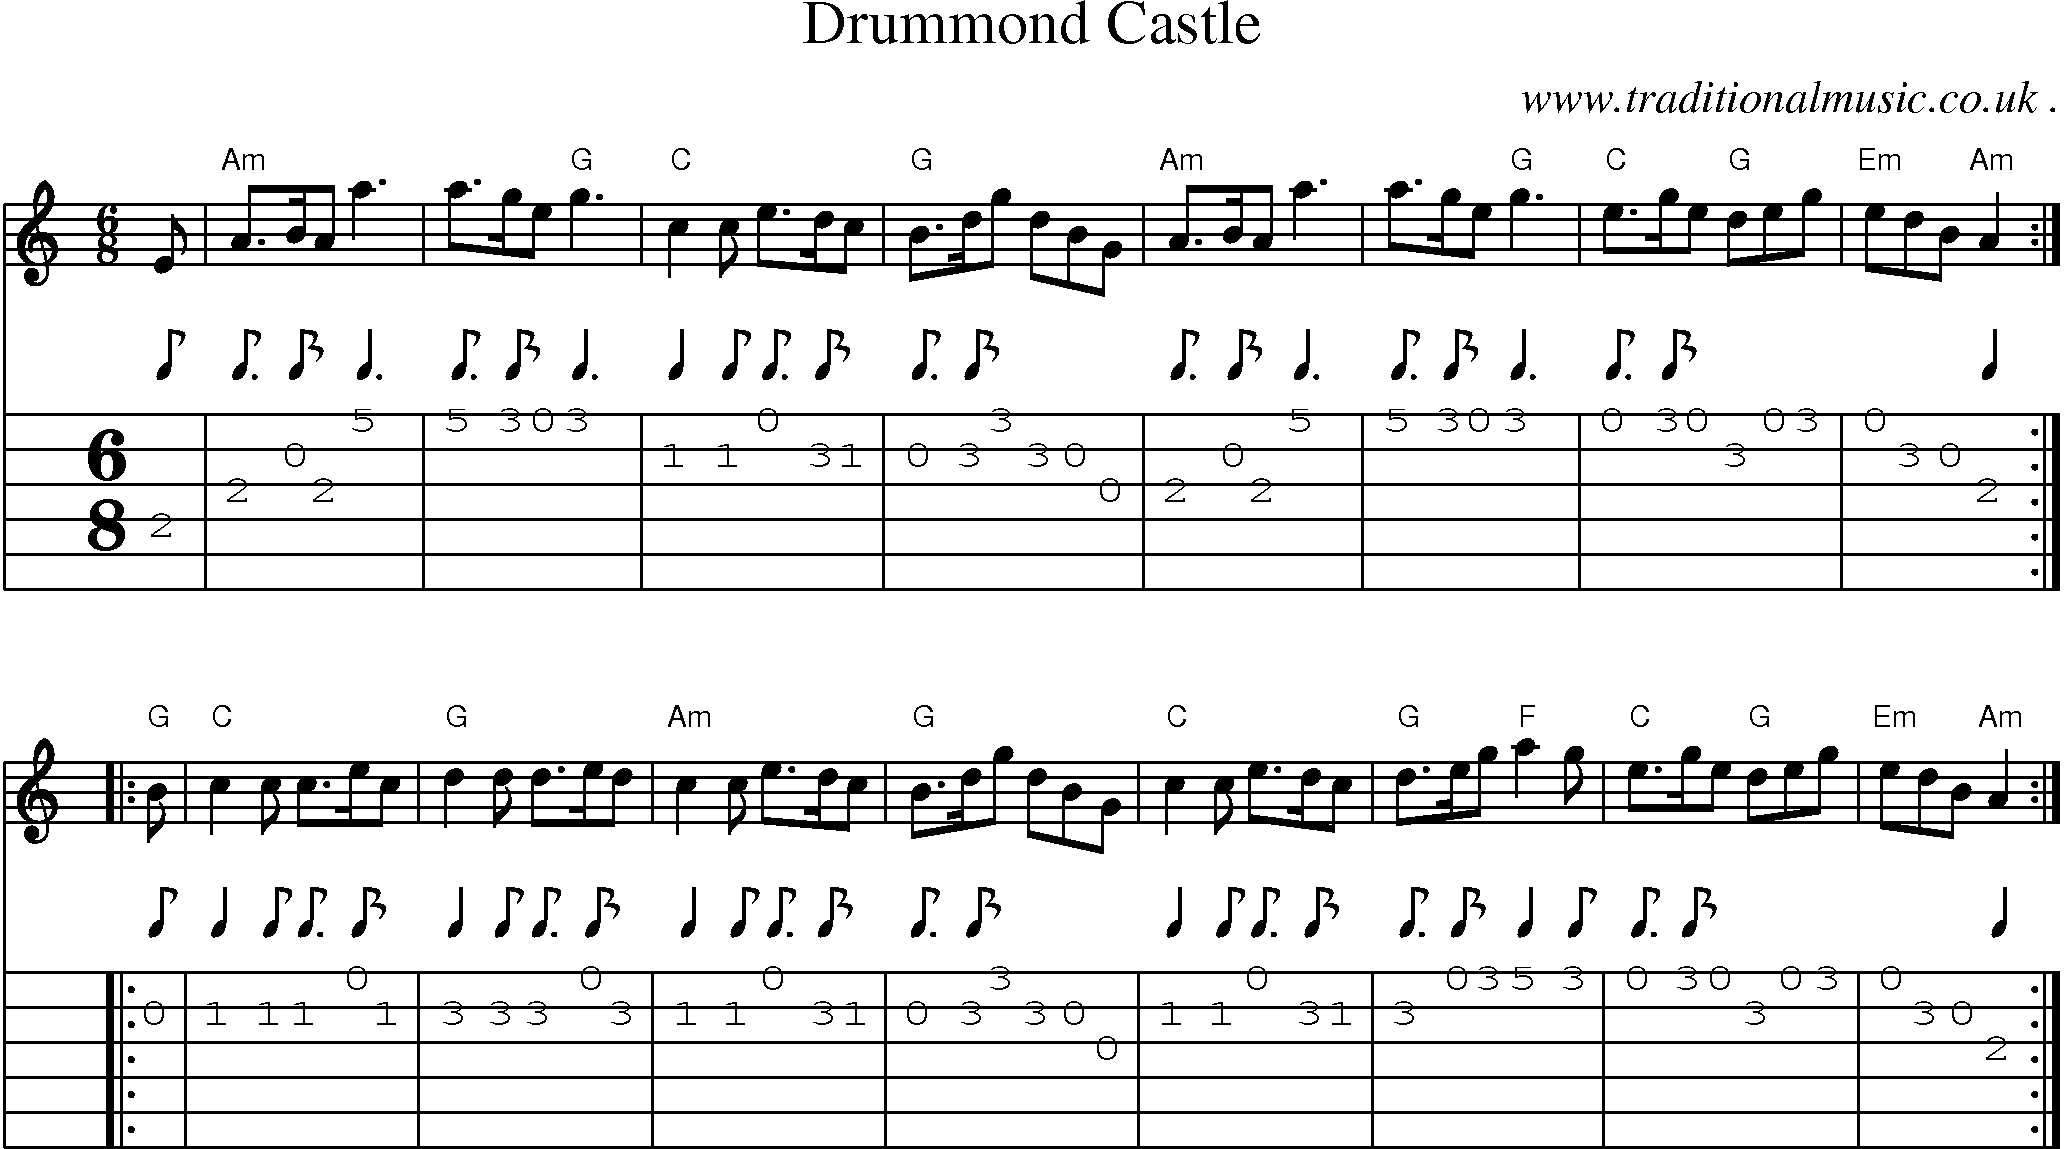 Sheet-music  score, Chords and Guitar Tabs for Drummond Castle